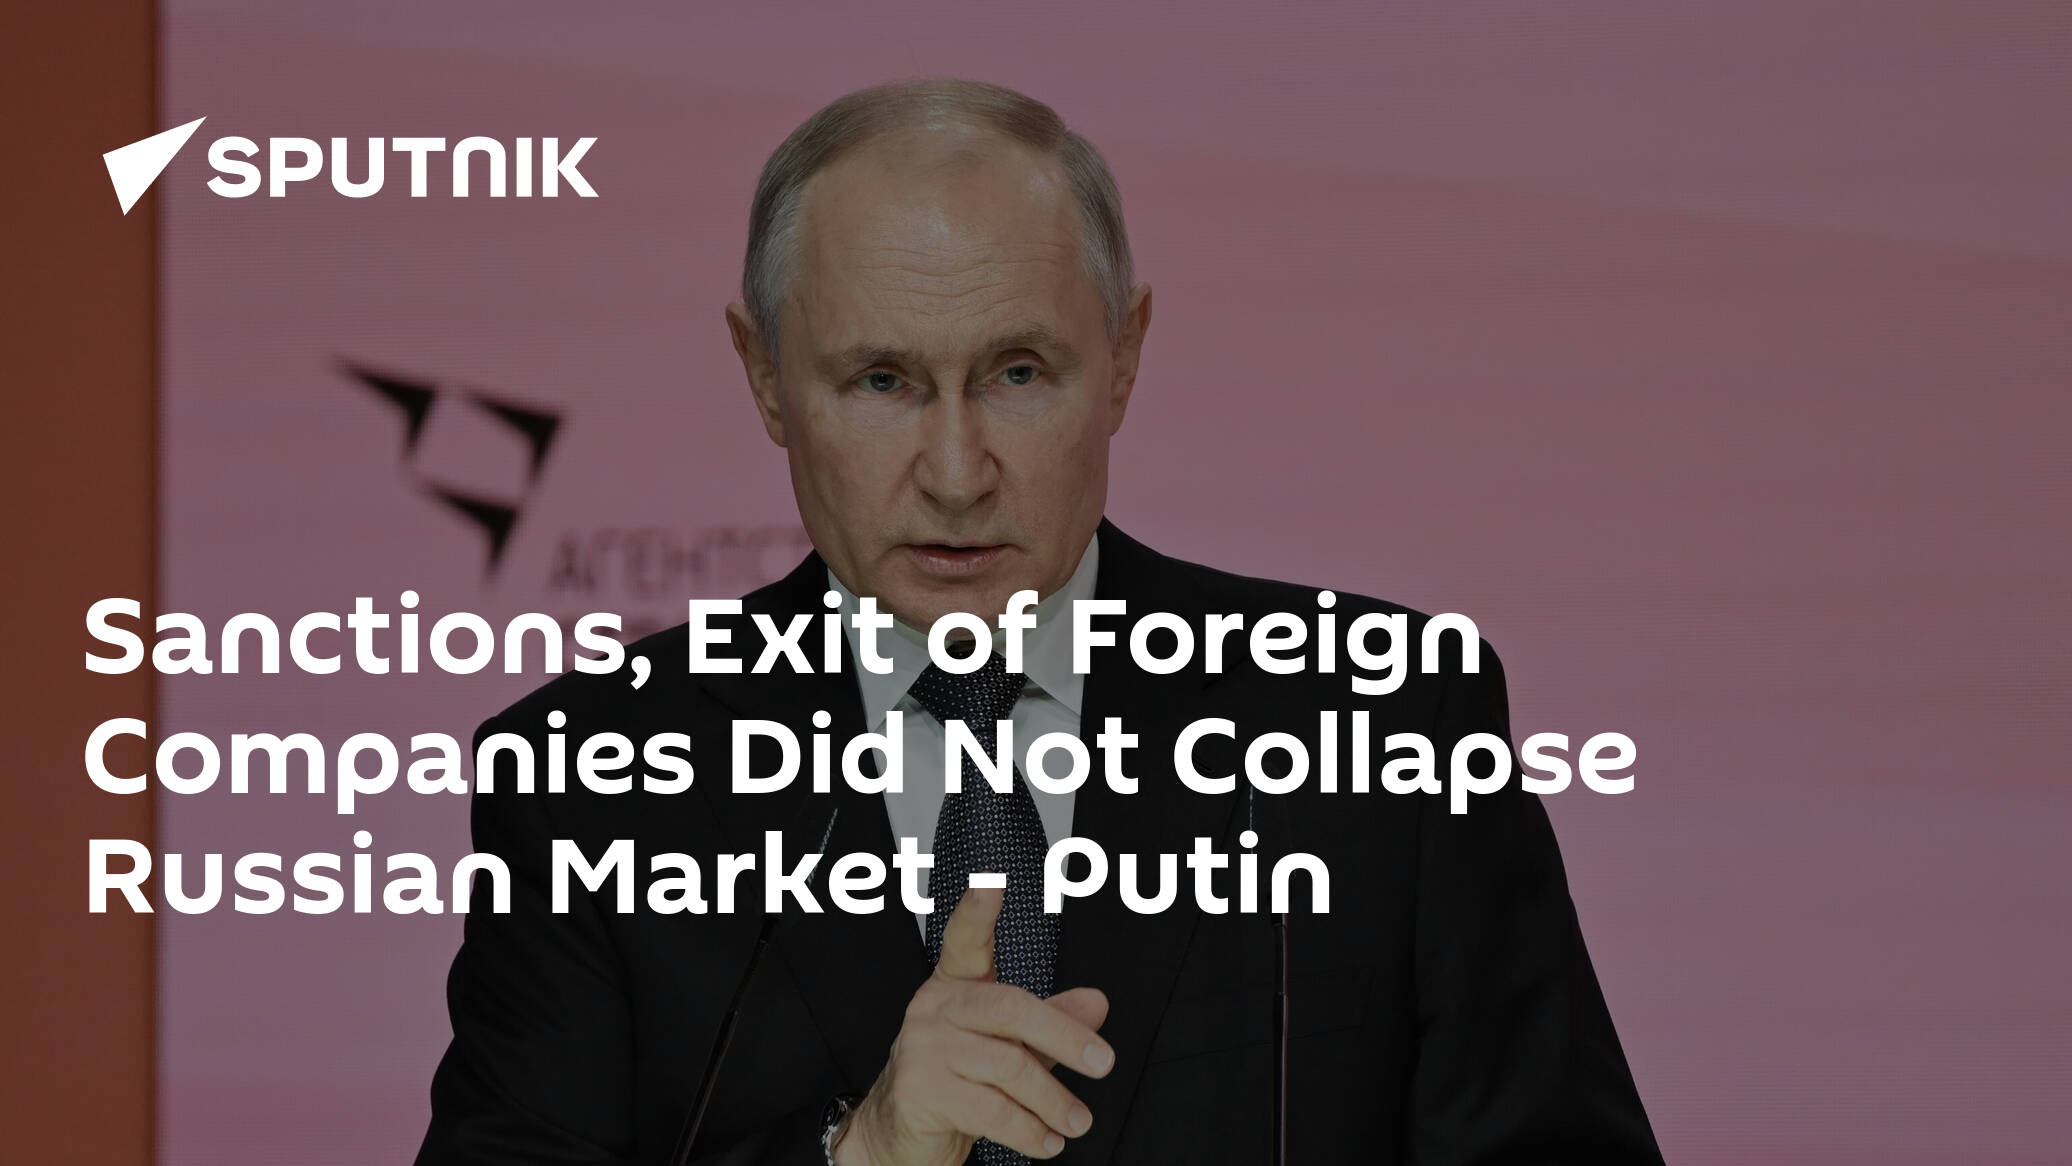 Sanctions, Exit of Foreign Companies Did Not Collapse Russian Market – Putin